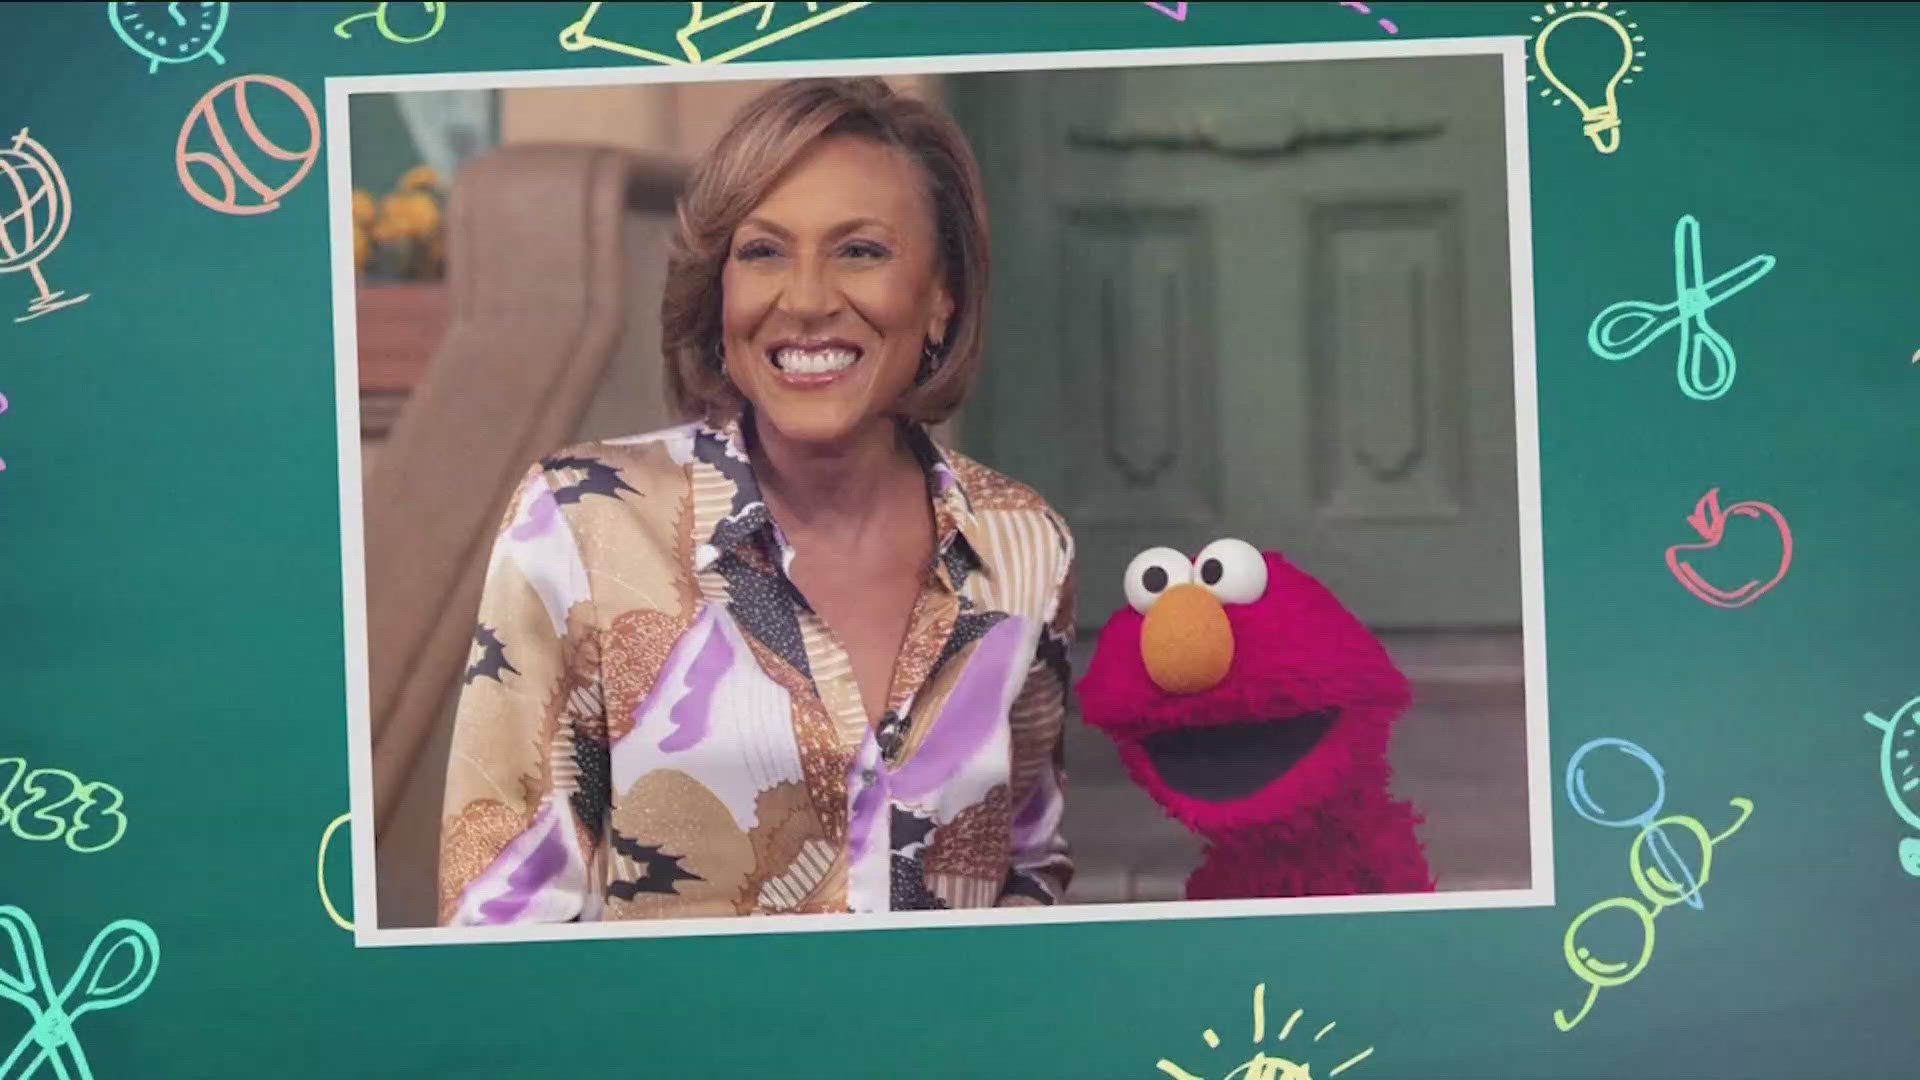 Good Morning America co-host Robin Roberts visited Sesame Street to speak with Elmo about his recent viral tweet and the importance of Mental Health Awareness Month.